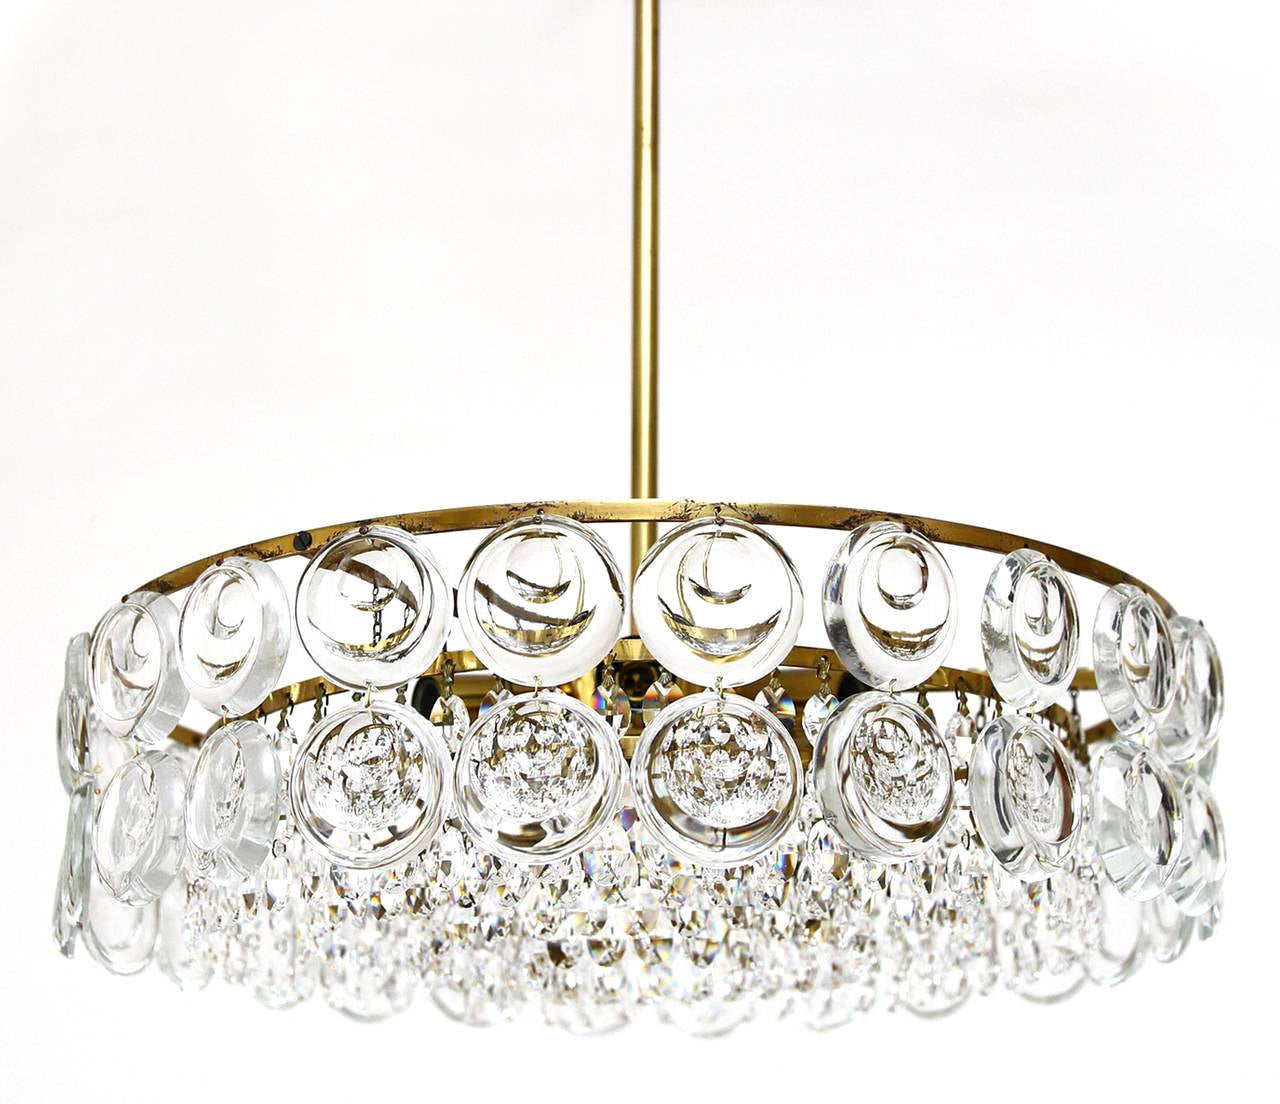 Impressive Italian chandelier or flush mount light with large crystals in the style of Sciolari from the 1960s / 1970s. The crystals have the form of large lenses. Nice patina on brass.

We can provide a flush mount fixture or a brass stem in any